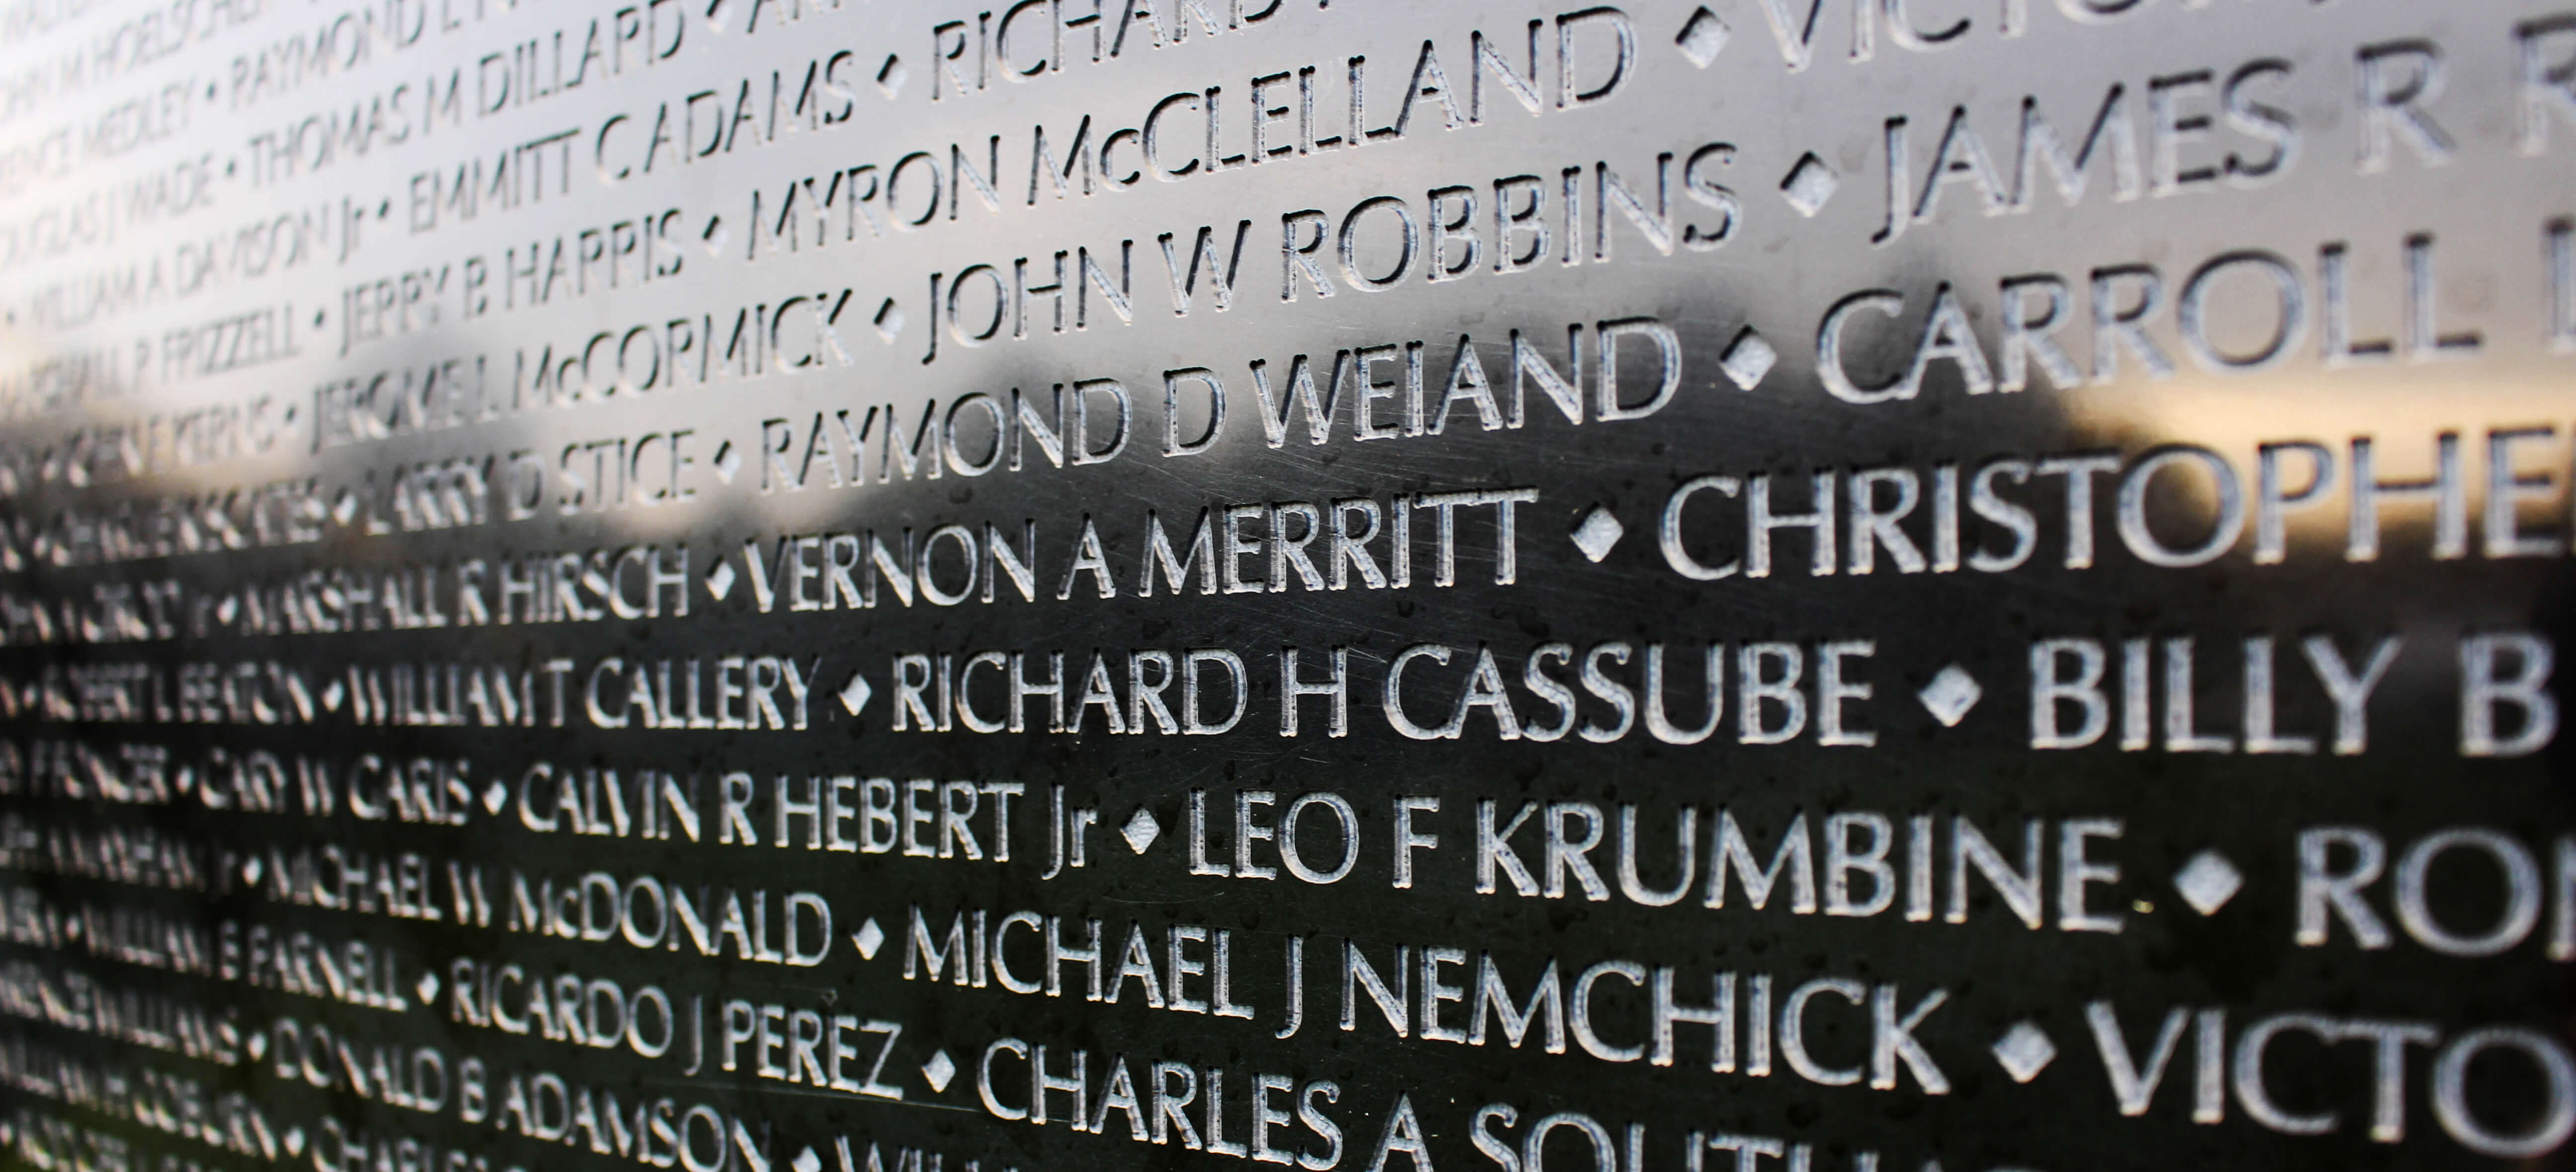 Names engraved on a memorial wall.